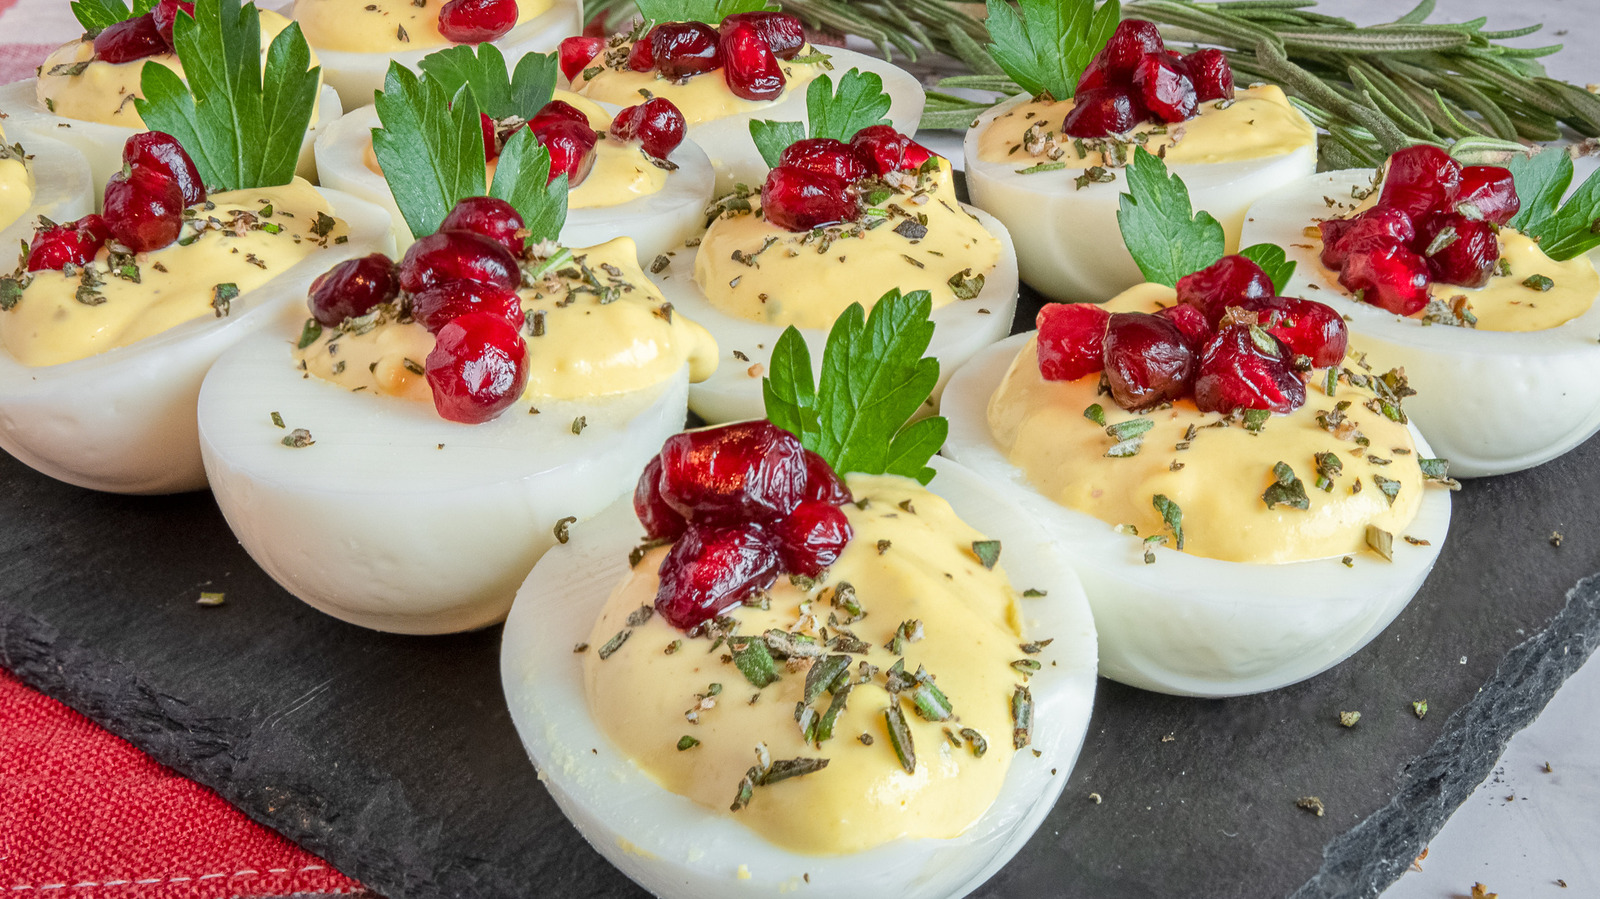 https://www.mashed.com/img/gallery/christmas-deviled-eggs-recipe/l-intro-1639676307.jpg